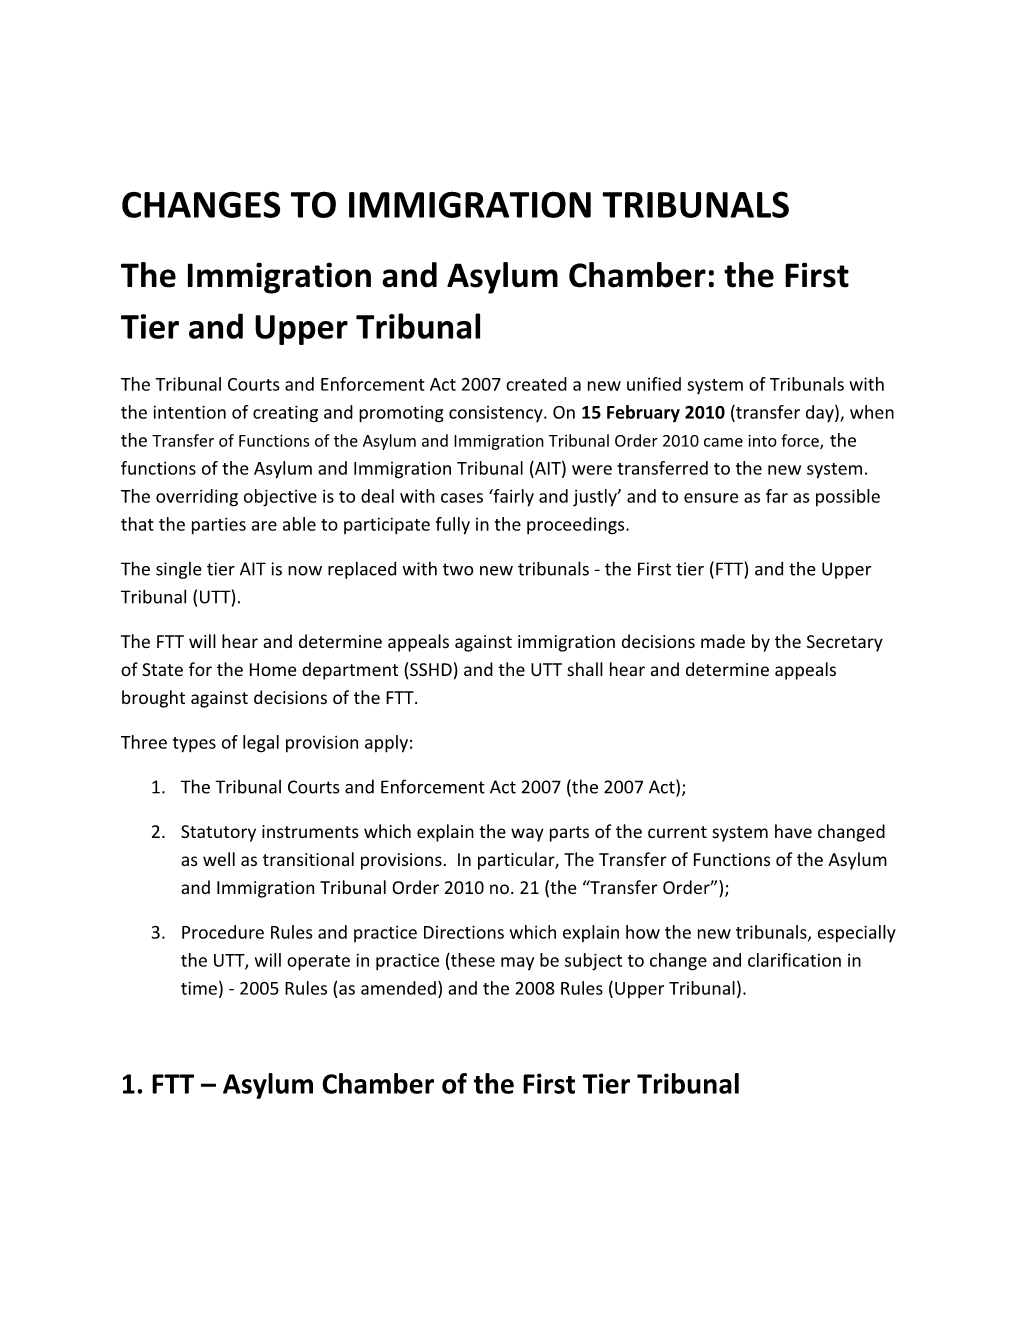 Changes to Immigration Tribunals